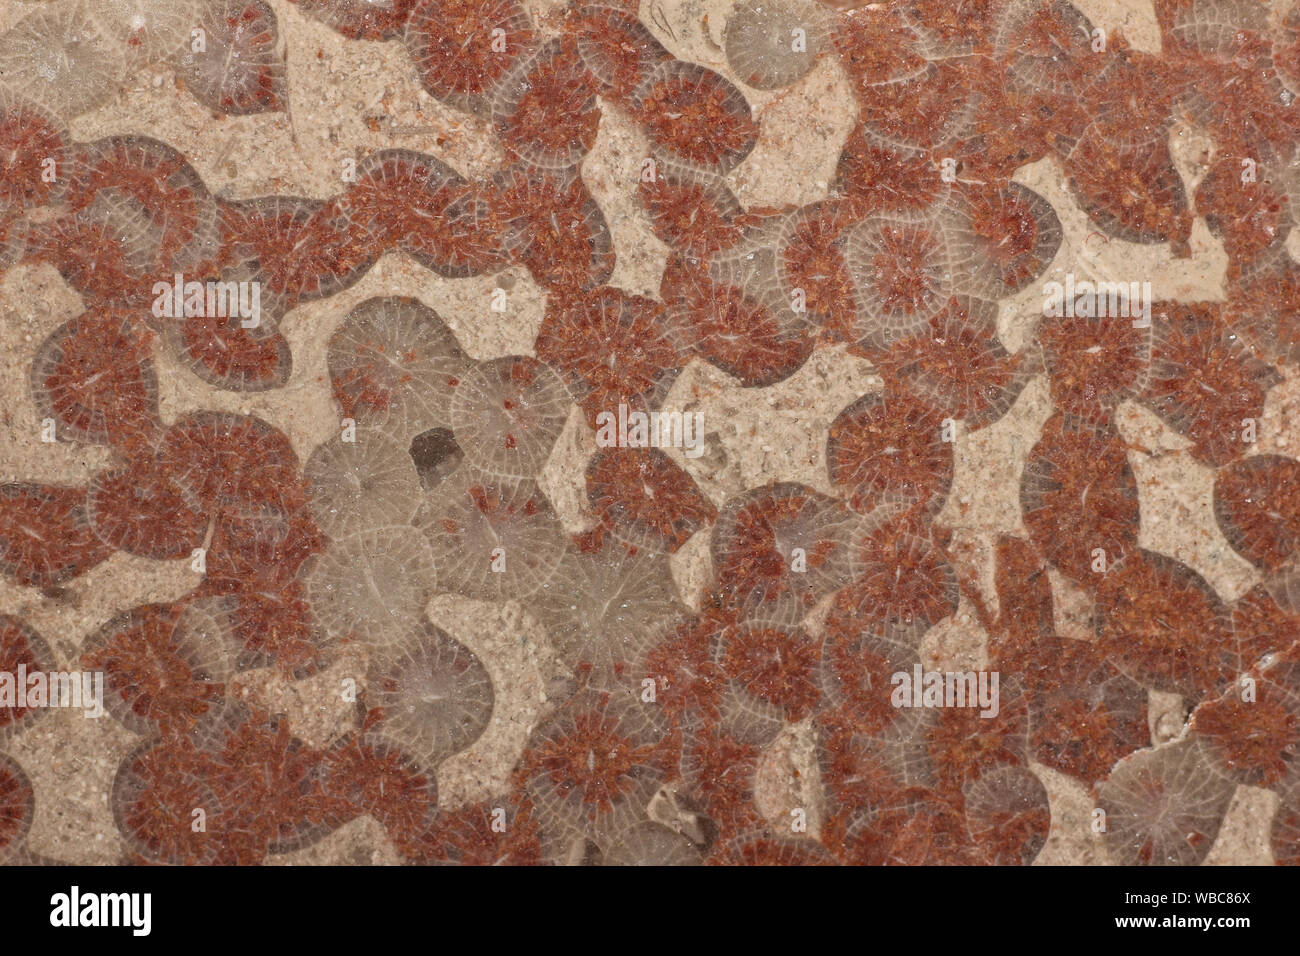 Lithostrotion (Siphonodendron) Rugose Coral Fossil Stock Photo